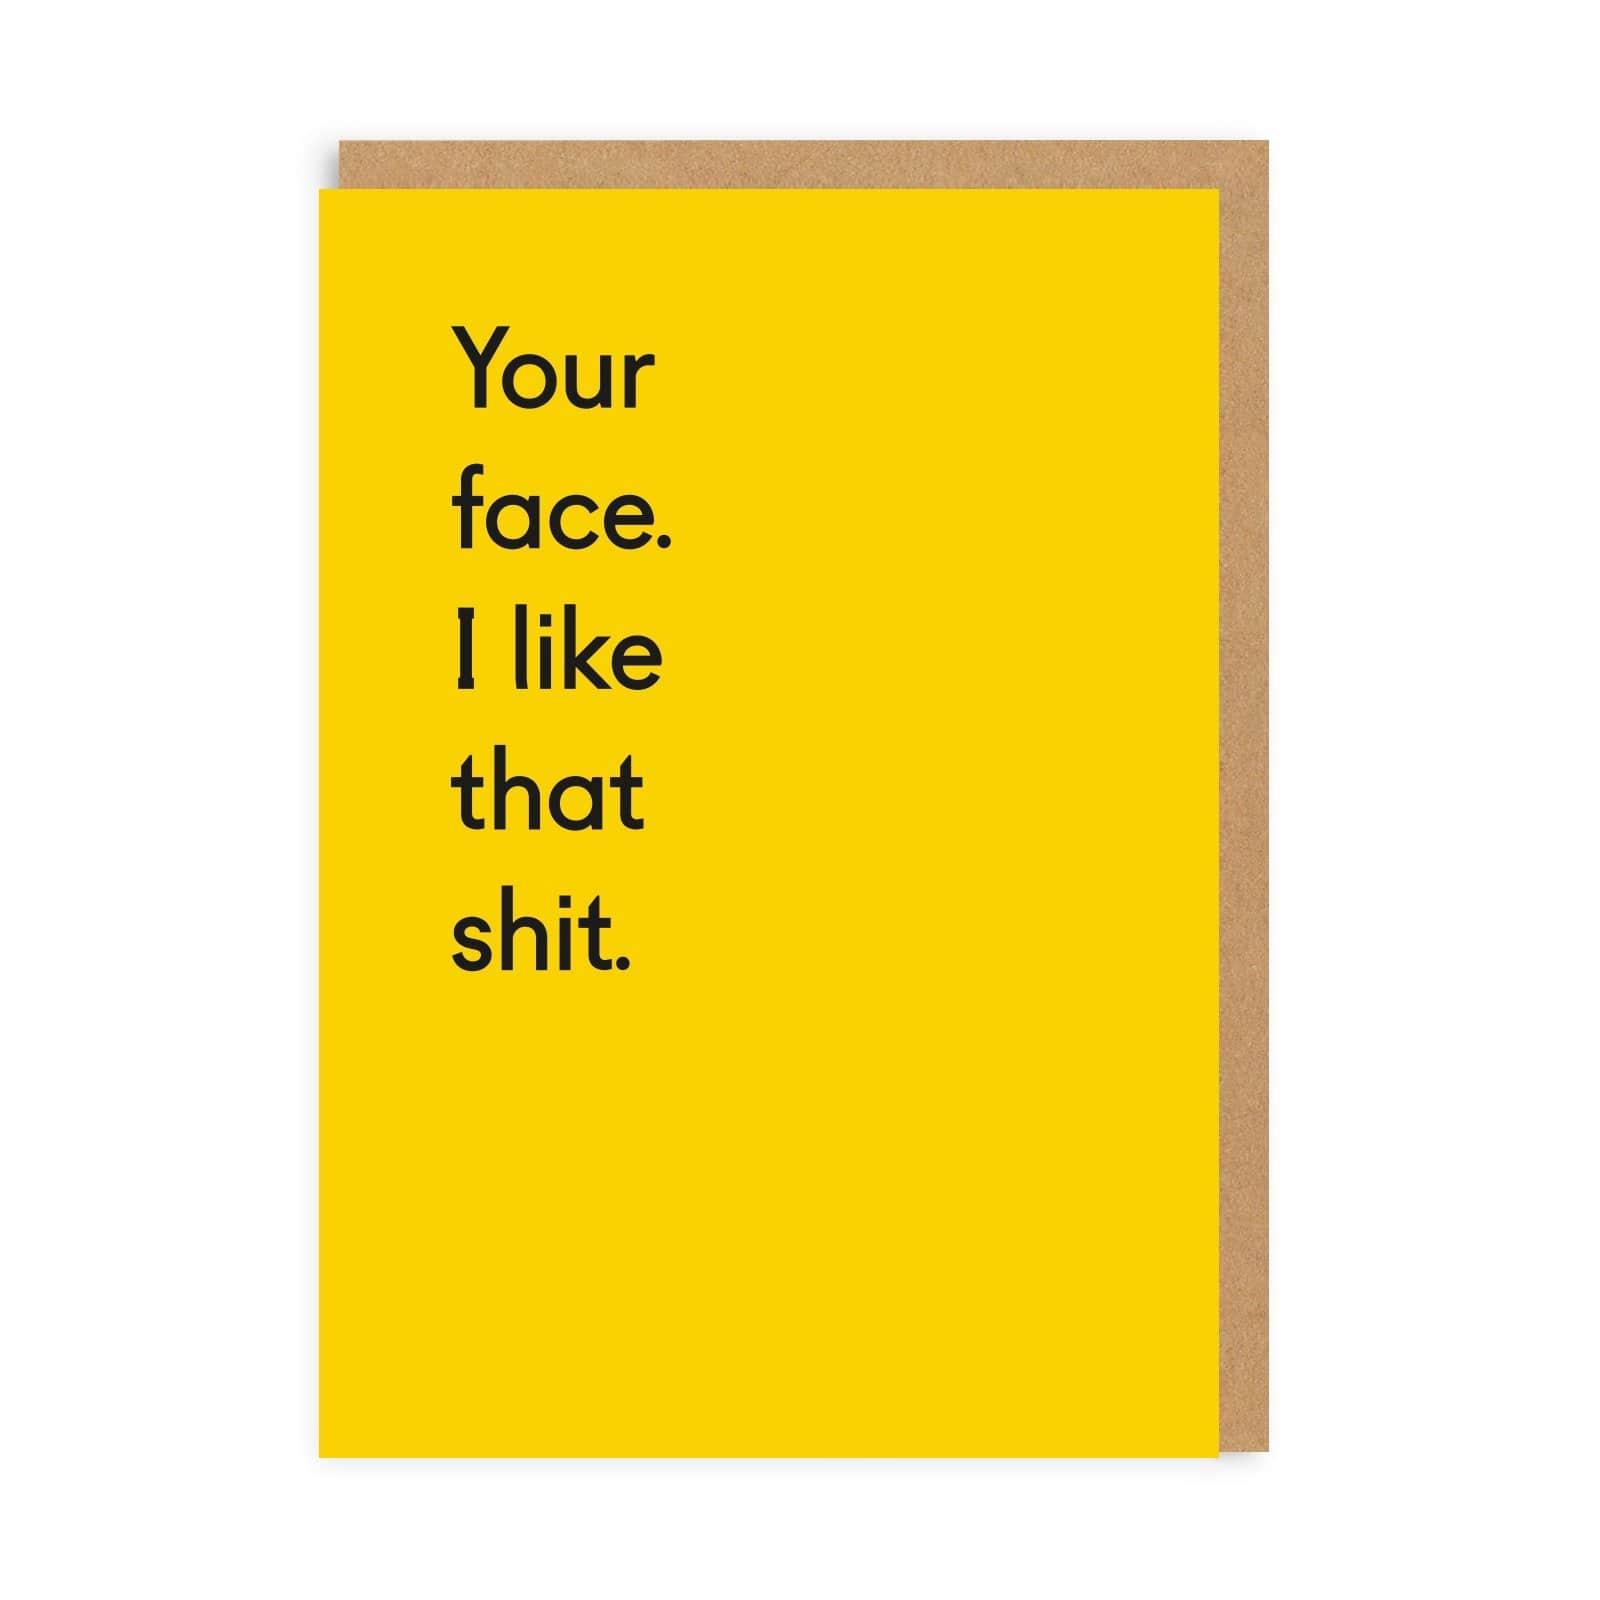 Valentine’s Day | Funny Valentines Card For Him or Her | Your Face. I Like That Shit. Greeting Card | Ohh Deer Unique Valentine’s Card | Artwork by Twin Pines | Made In The UK, Eco-Friendly Materials, Plastic Free Packaging